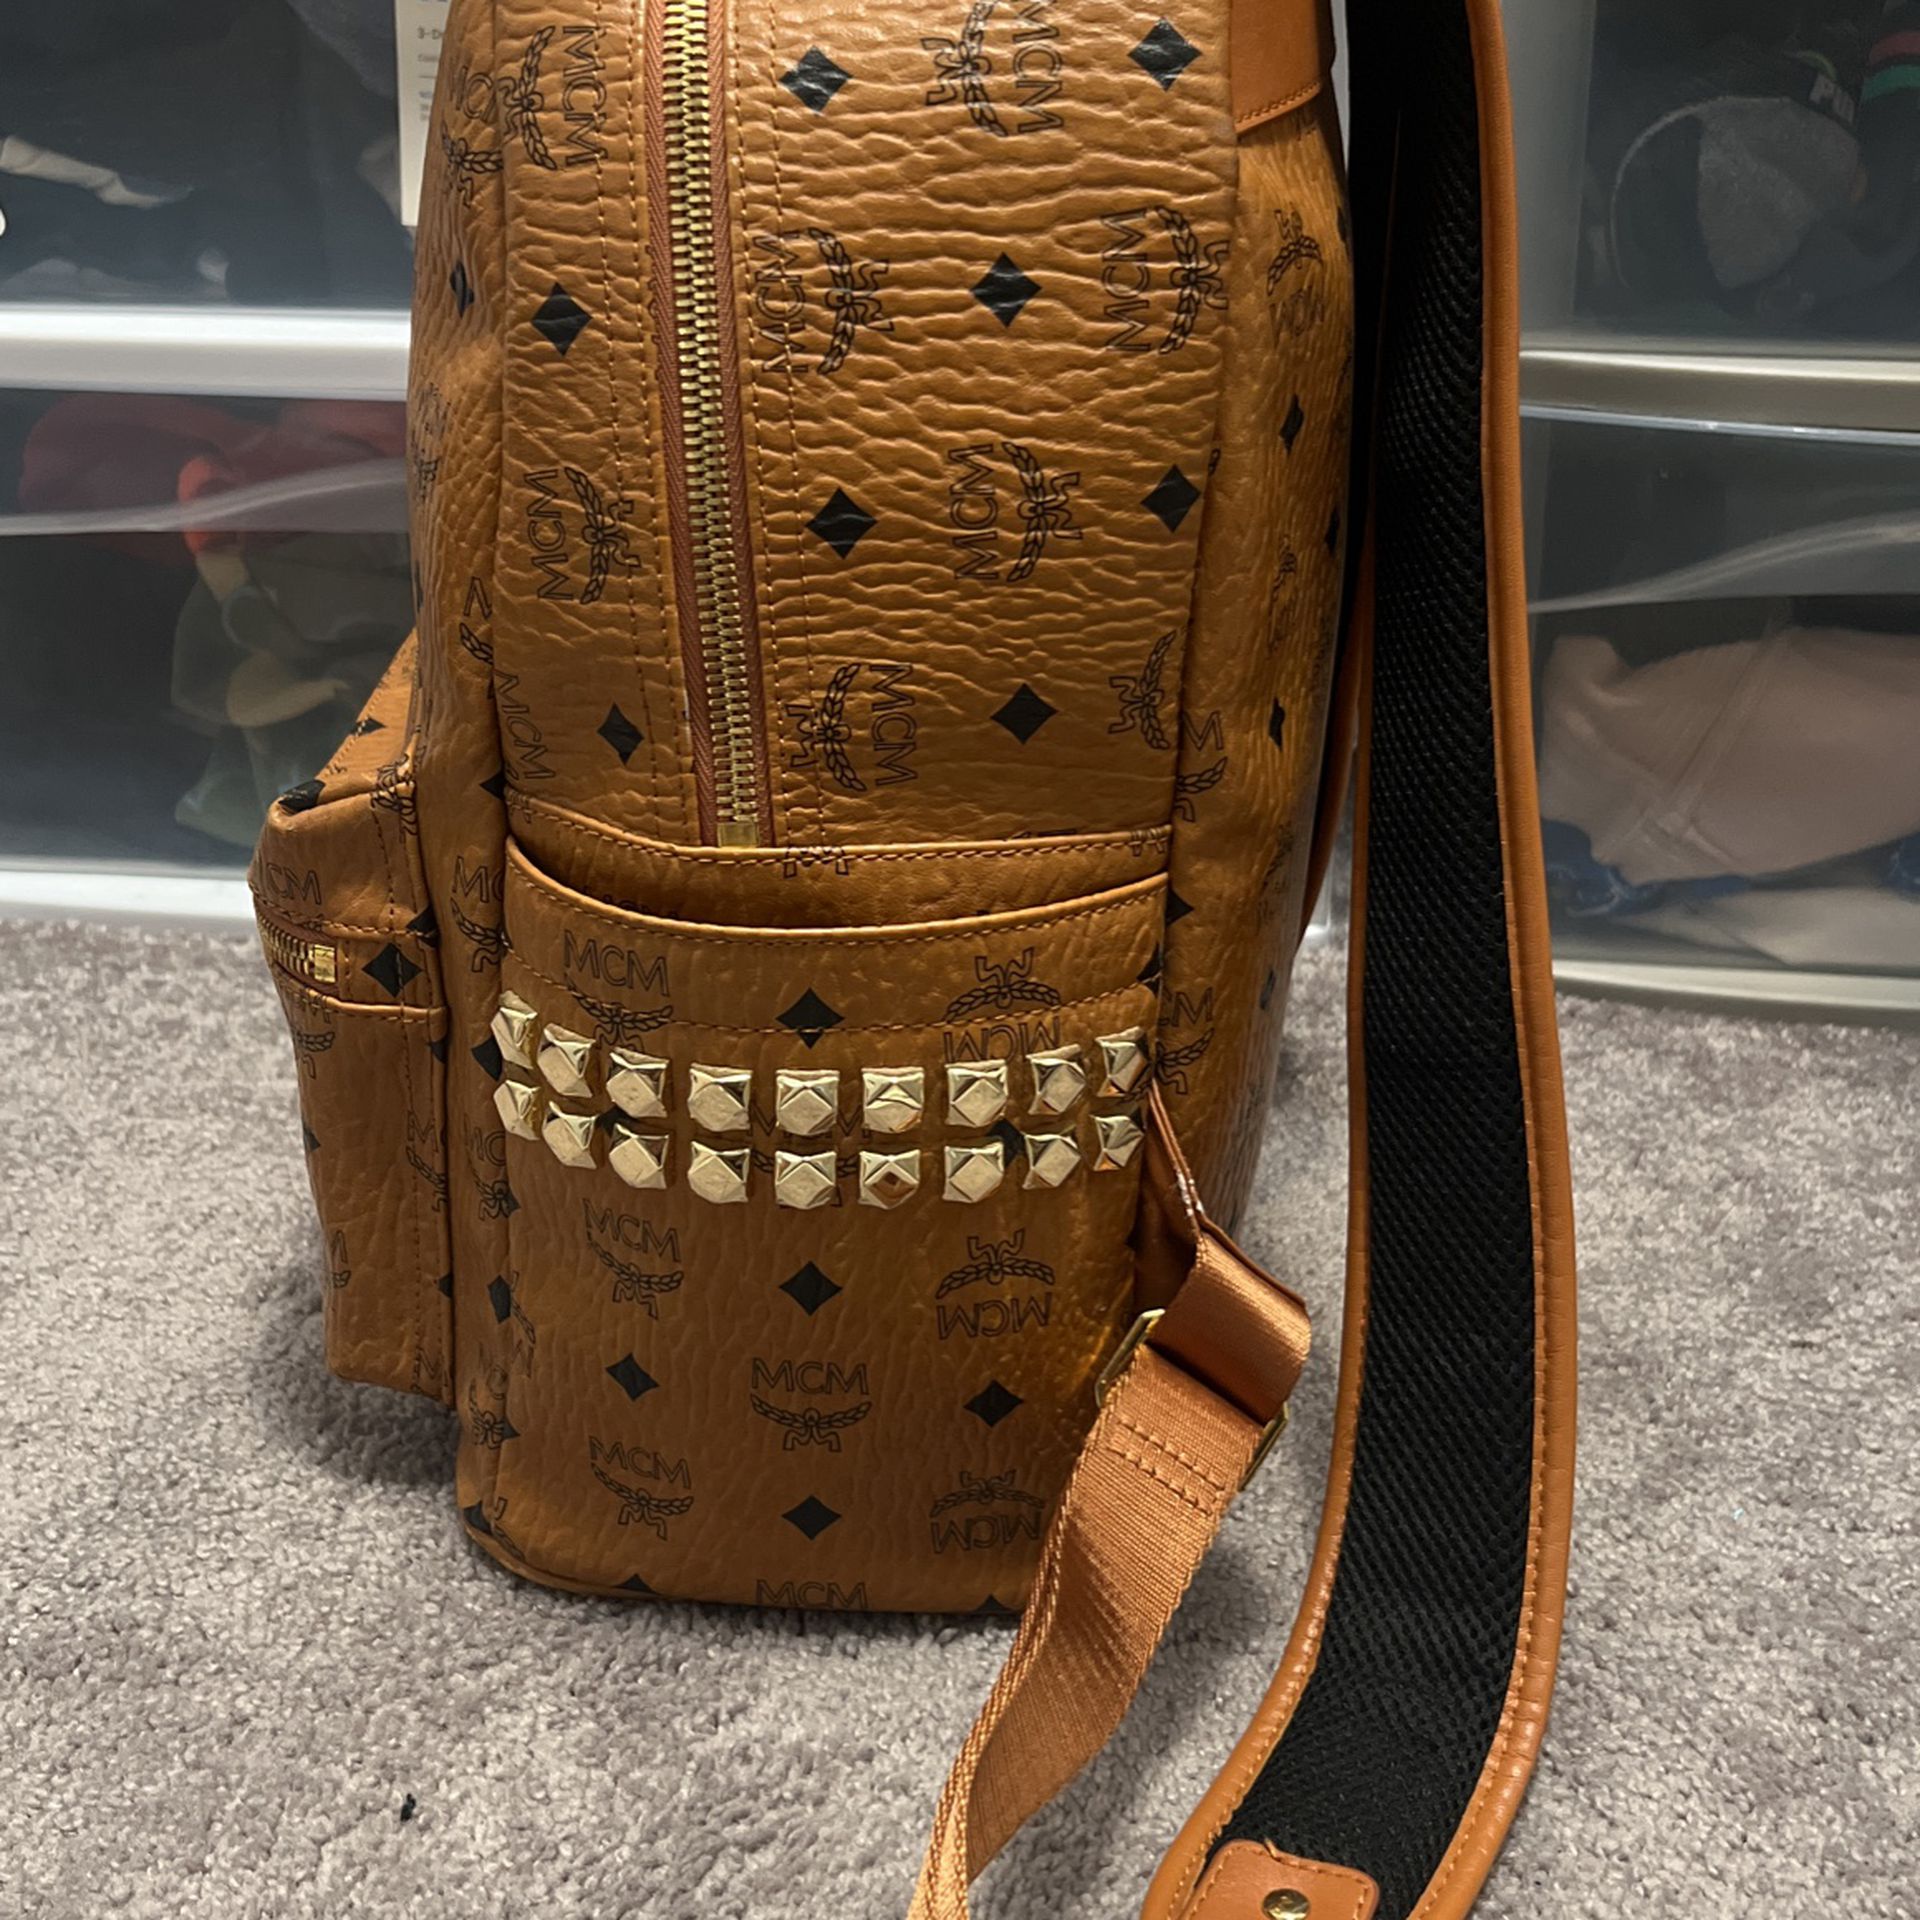 MCM BACKPACK for Sale in Old Rvr-wnfre, TX - OfferUp